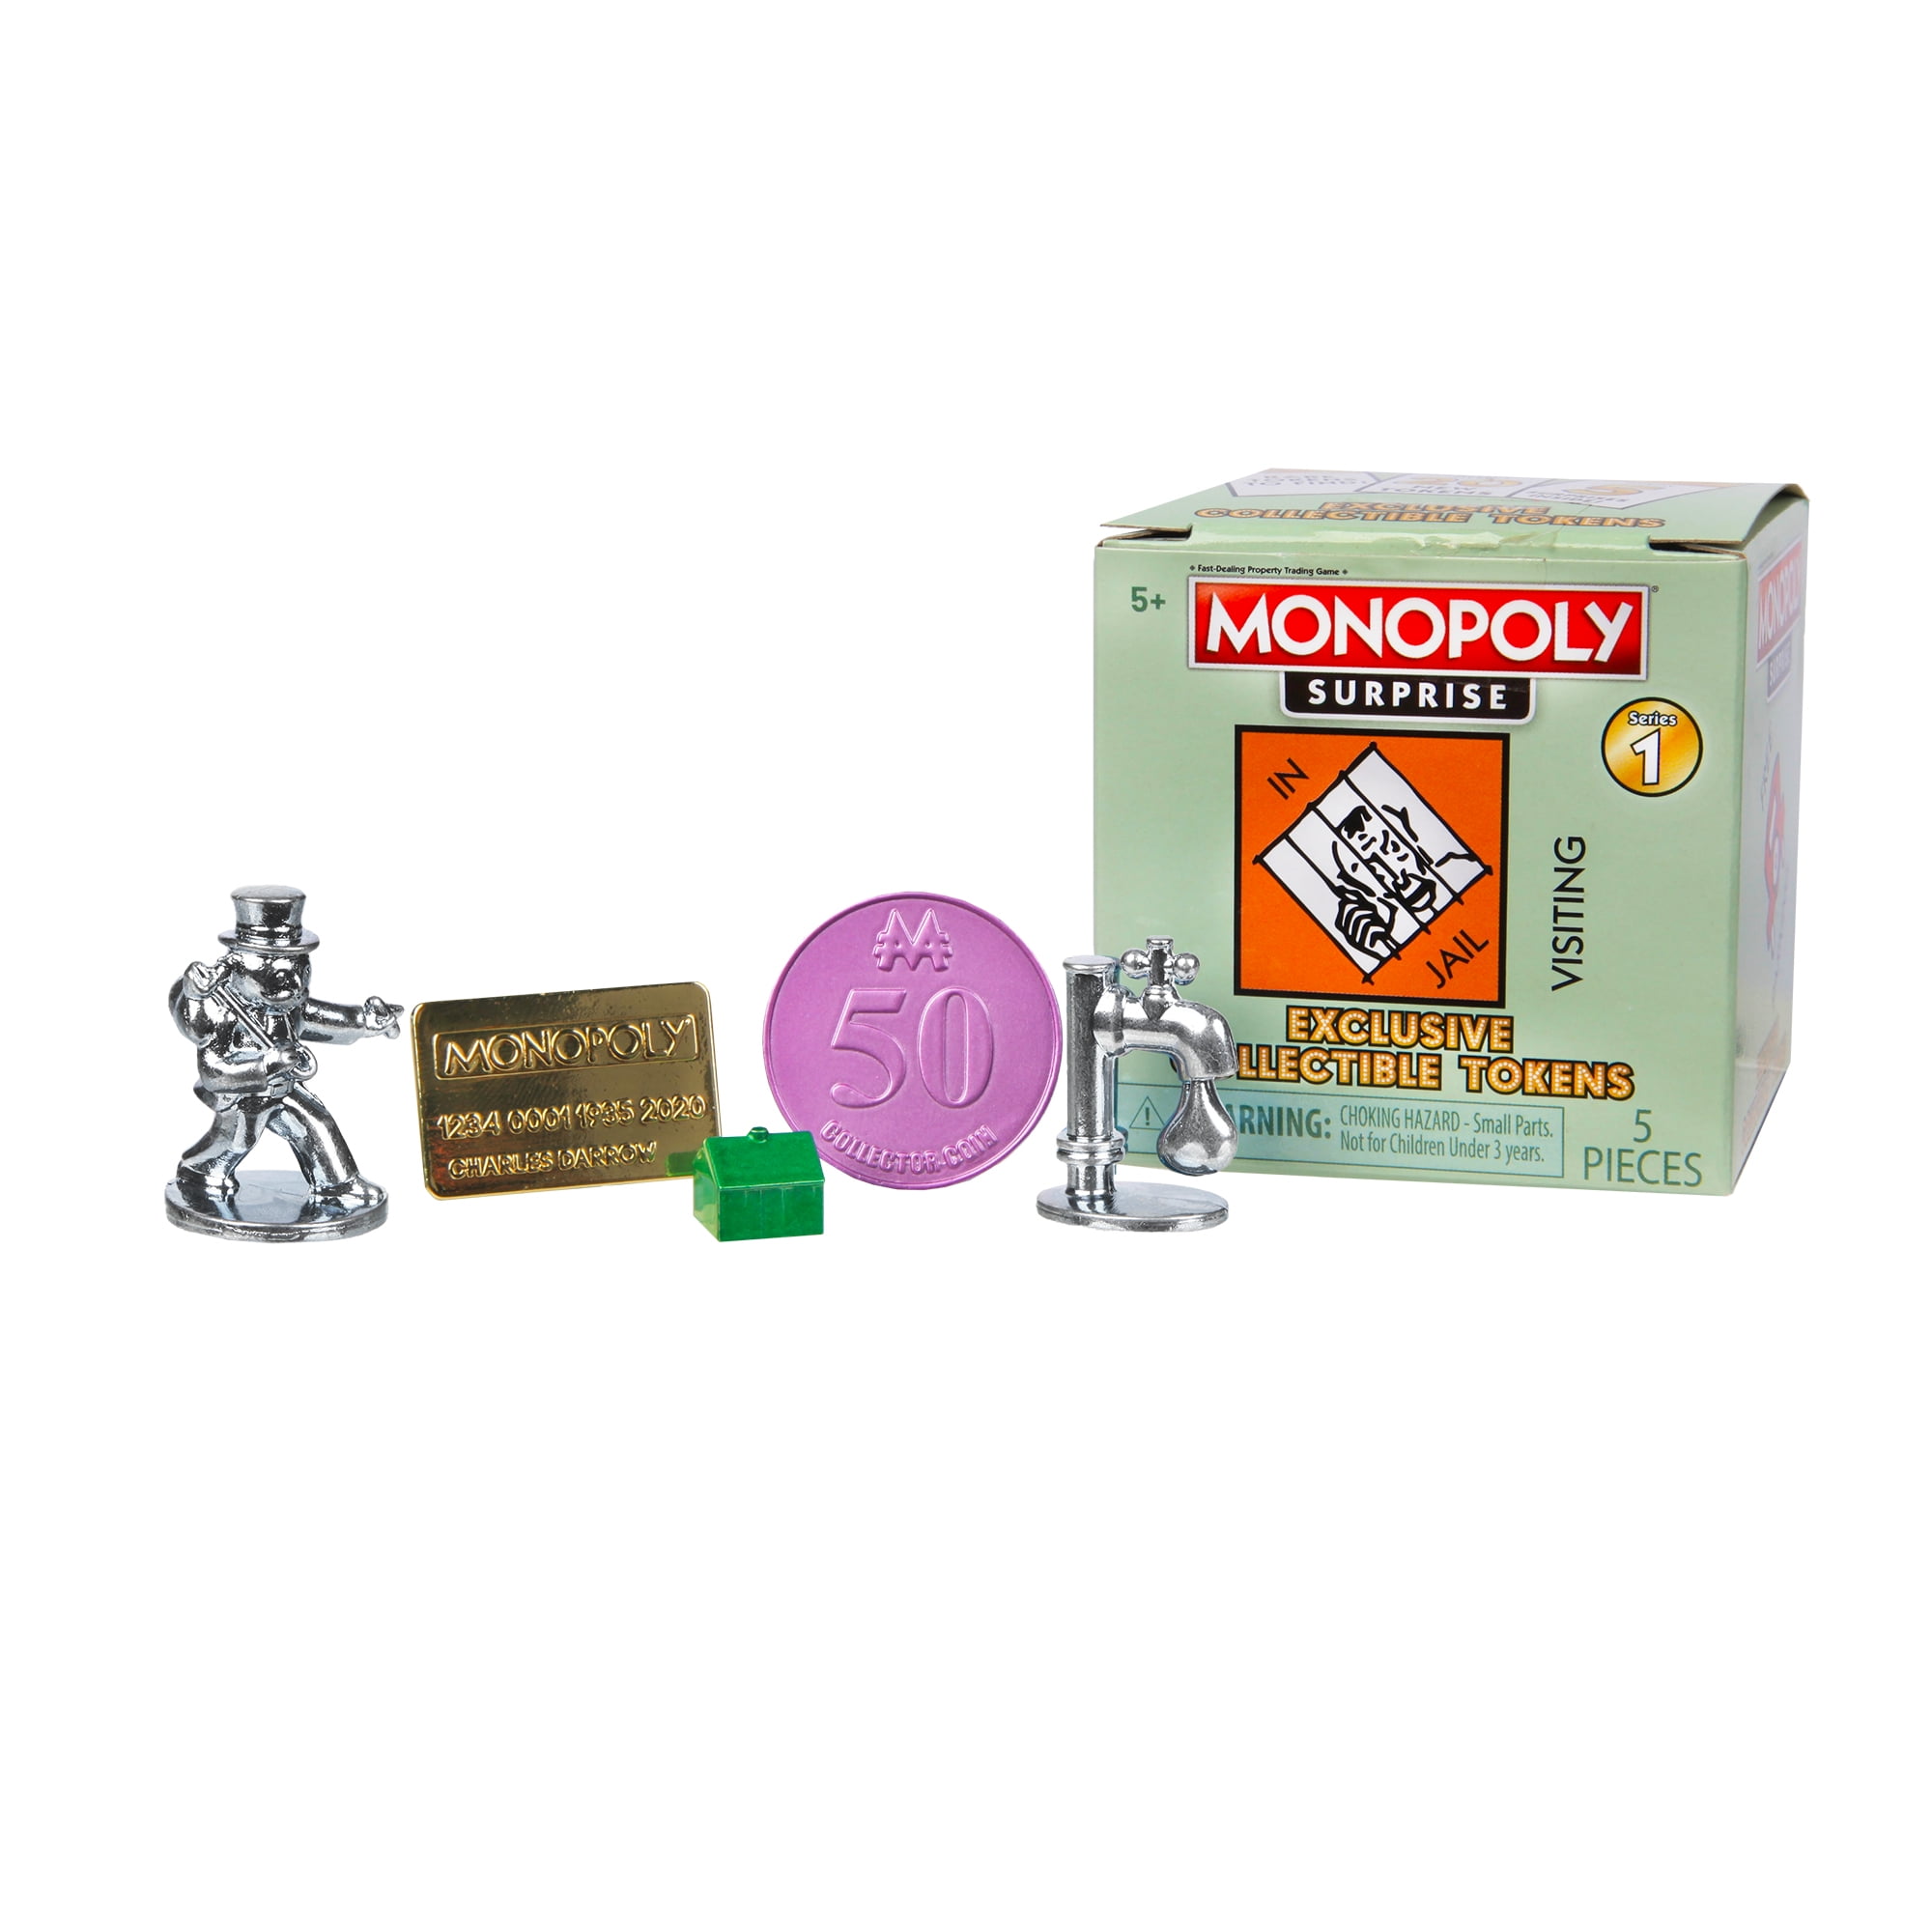 Monopoly SURPRISE Community Chest Token Game Piece YOU PICK Series 1 PRE-OWNED 